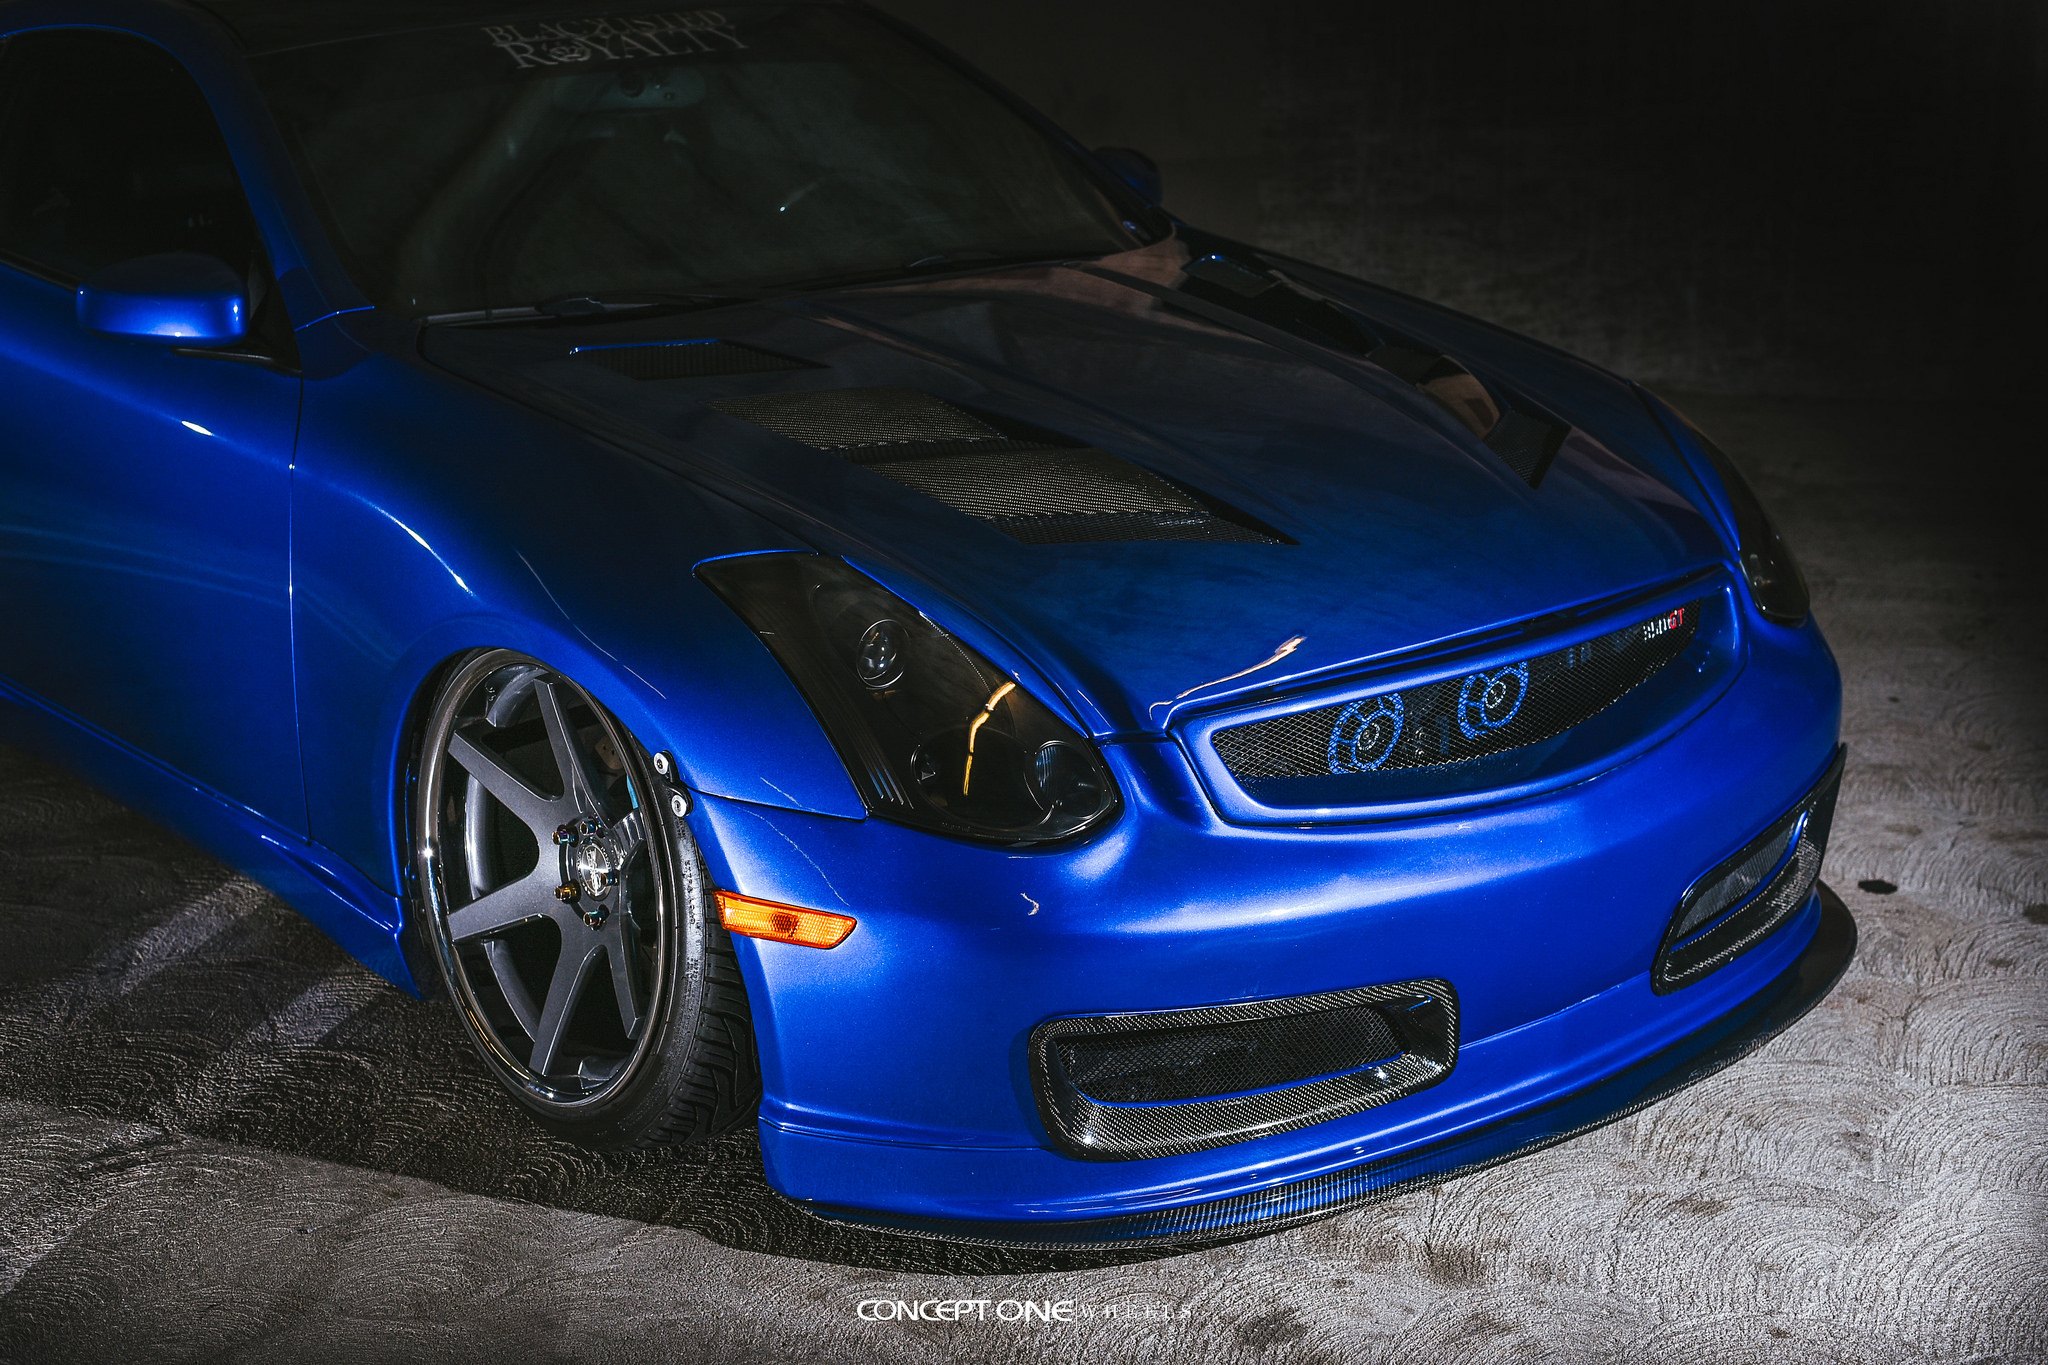 Aftermarket Hood with Air Vents on Blue Infiniti G35 - Photo by Concept One